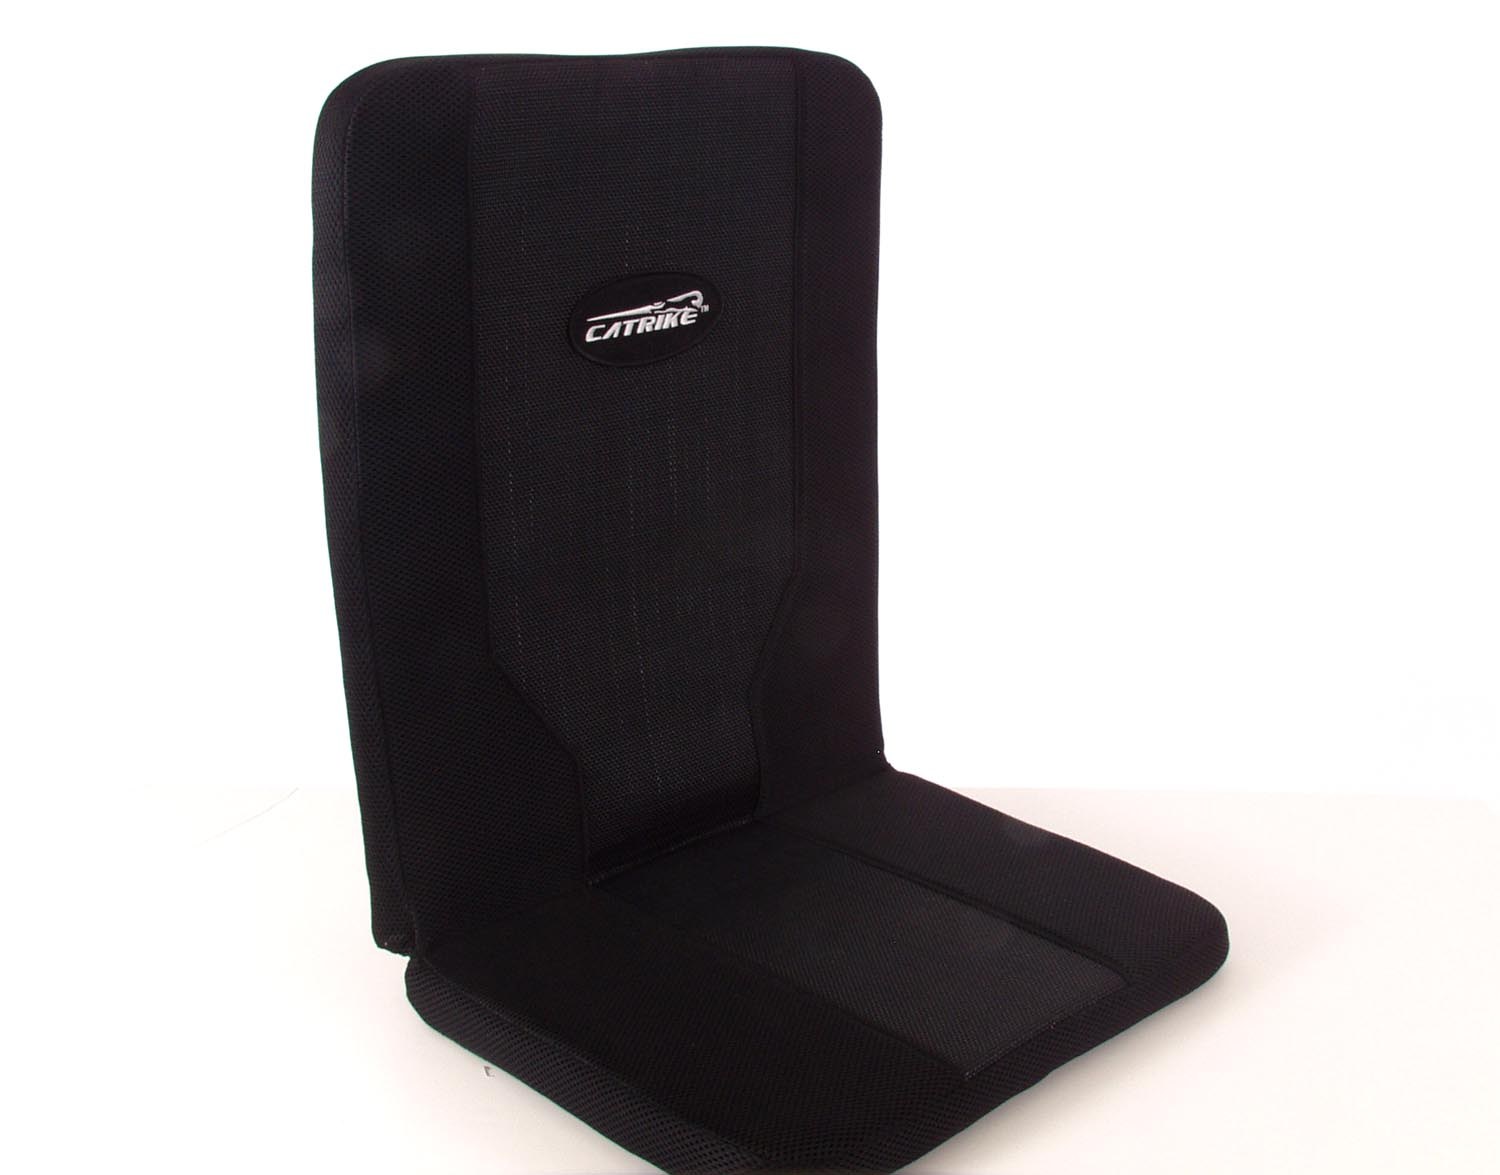 ventisit seat pads for catrikes